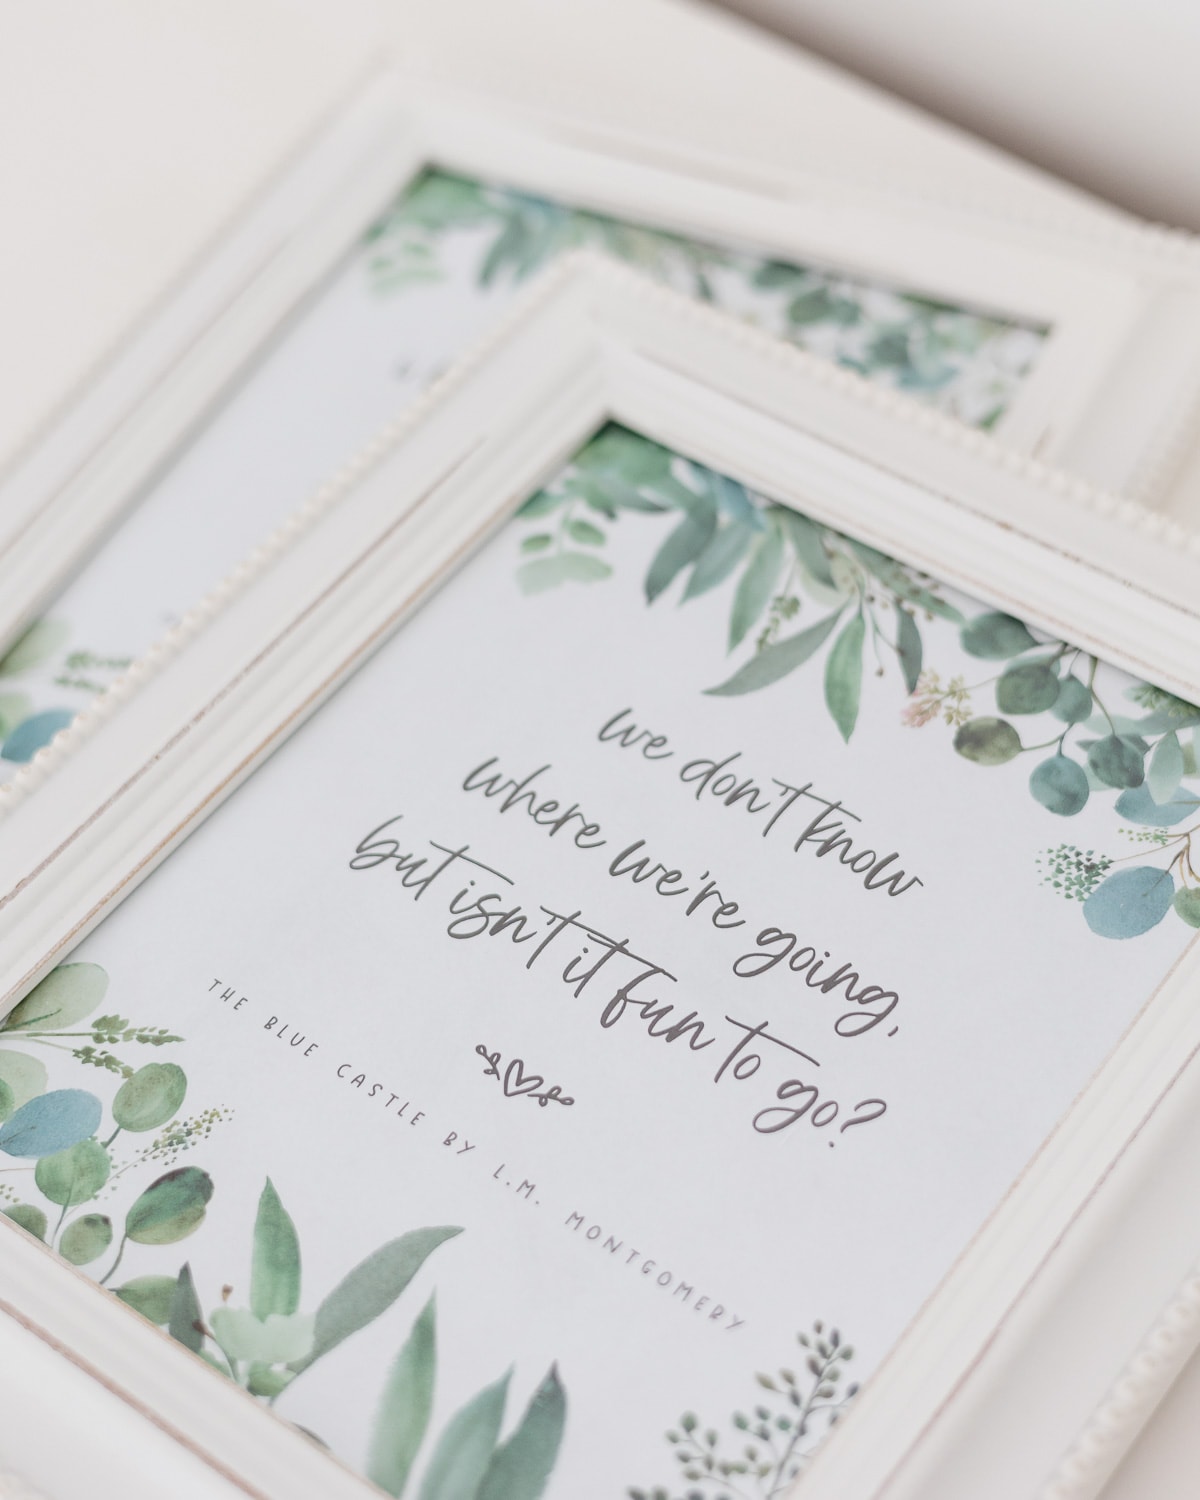 5 Free Spring Printables featuring Jane Austen, L.M. Montgomery, and more